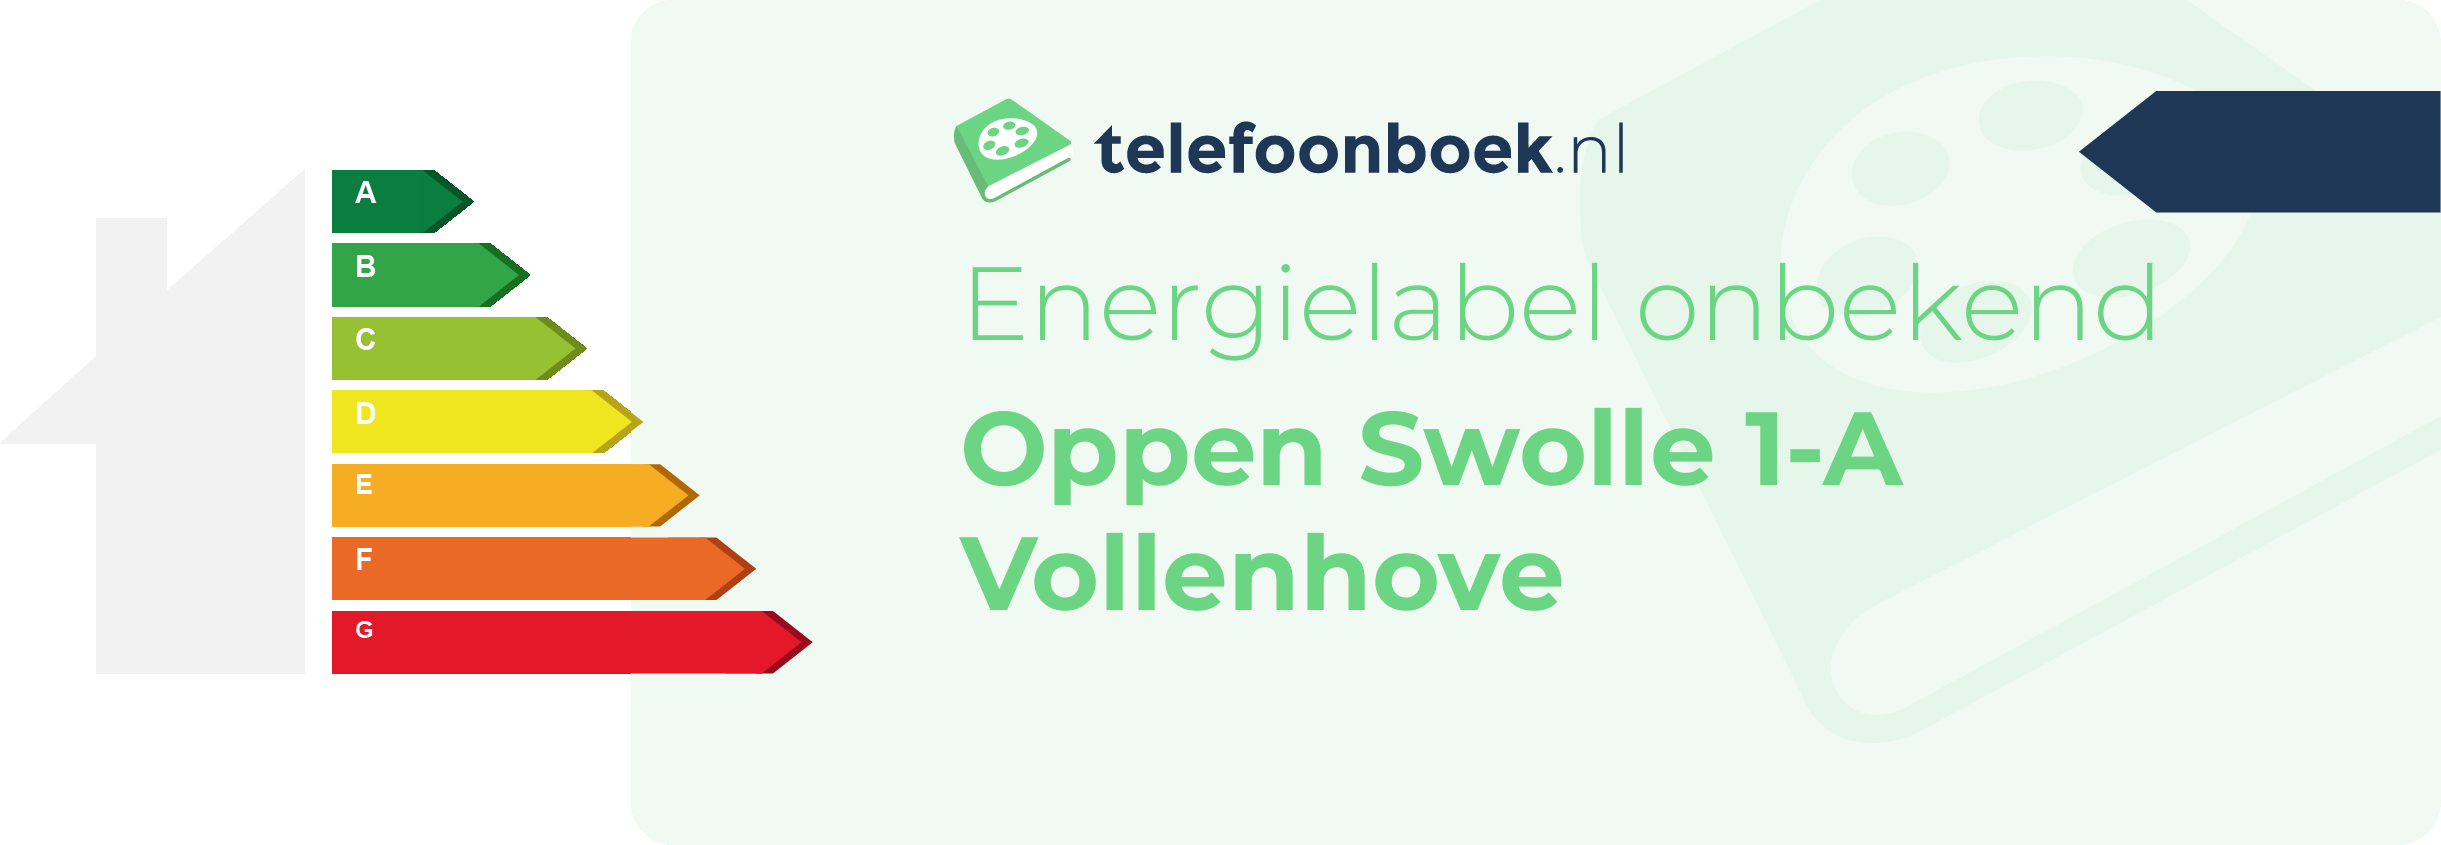 Energielabel Oppen Swolle 1-A Vollenhove